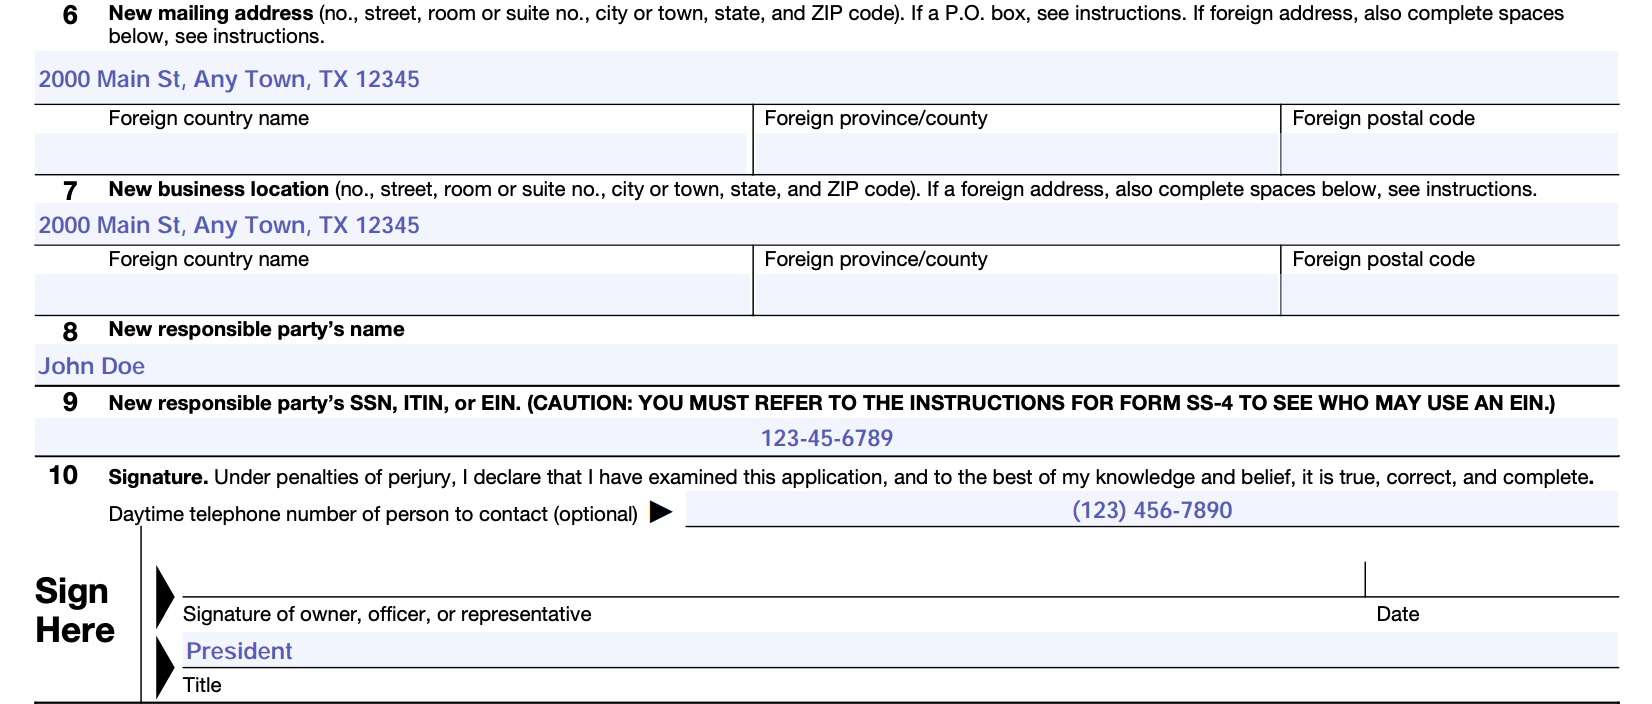 irs form 8822-b, change of address or responsible party - business, bottom